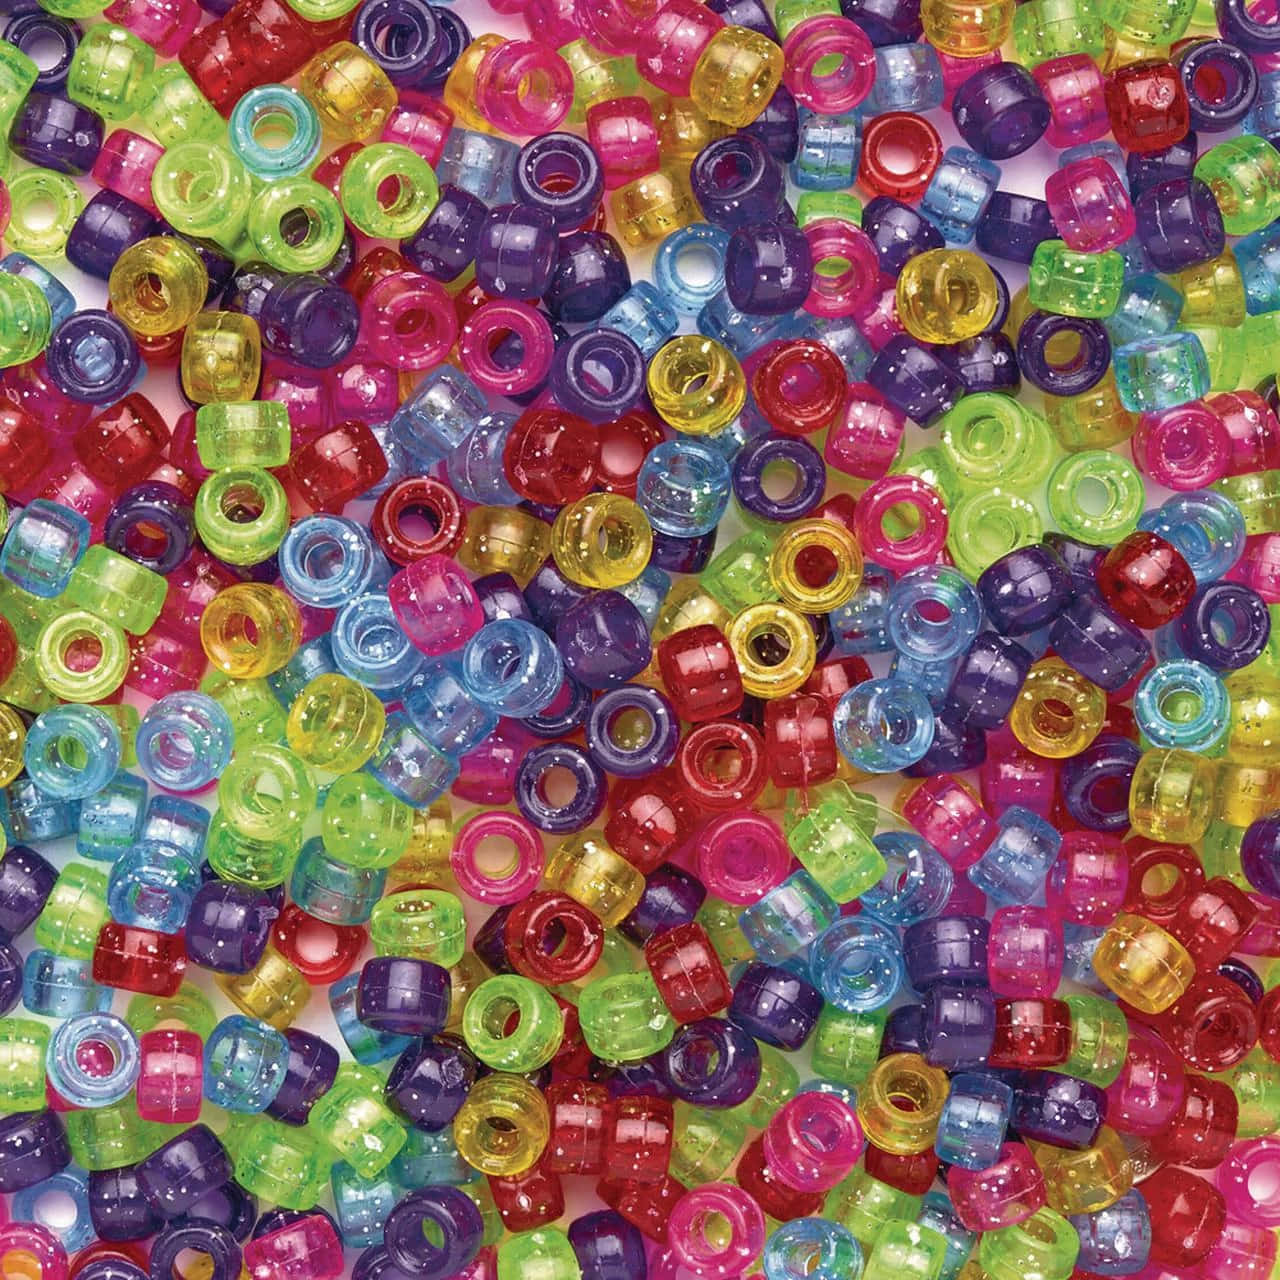 Colorful beads perfect for any craft or jewelry project